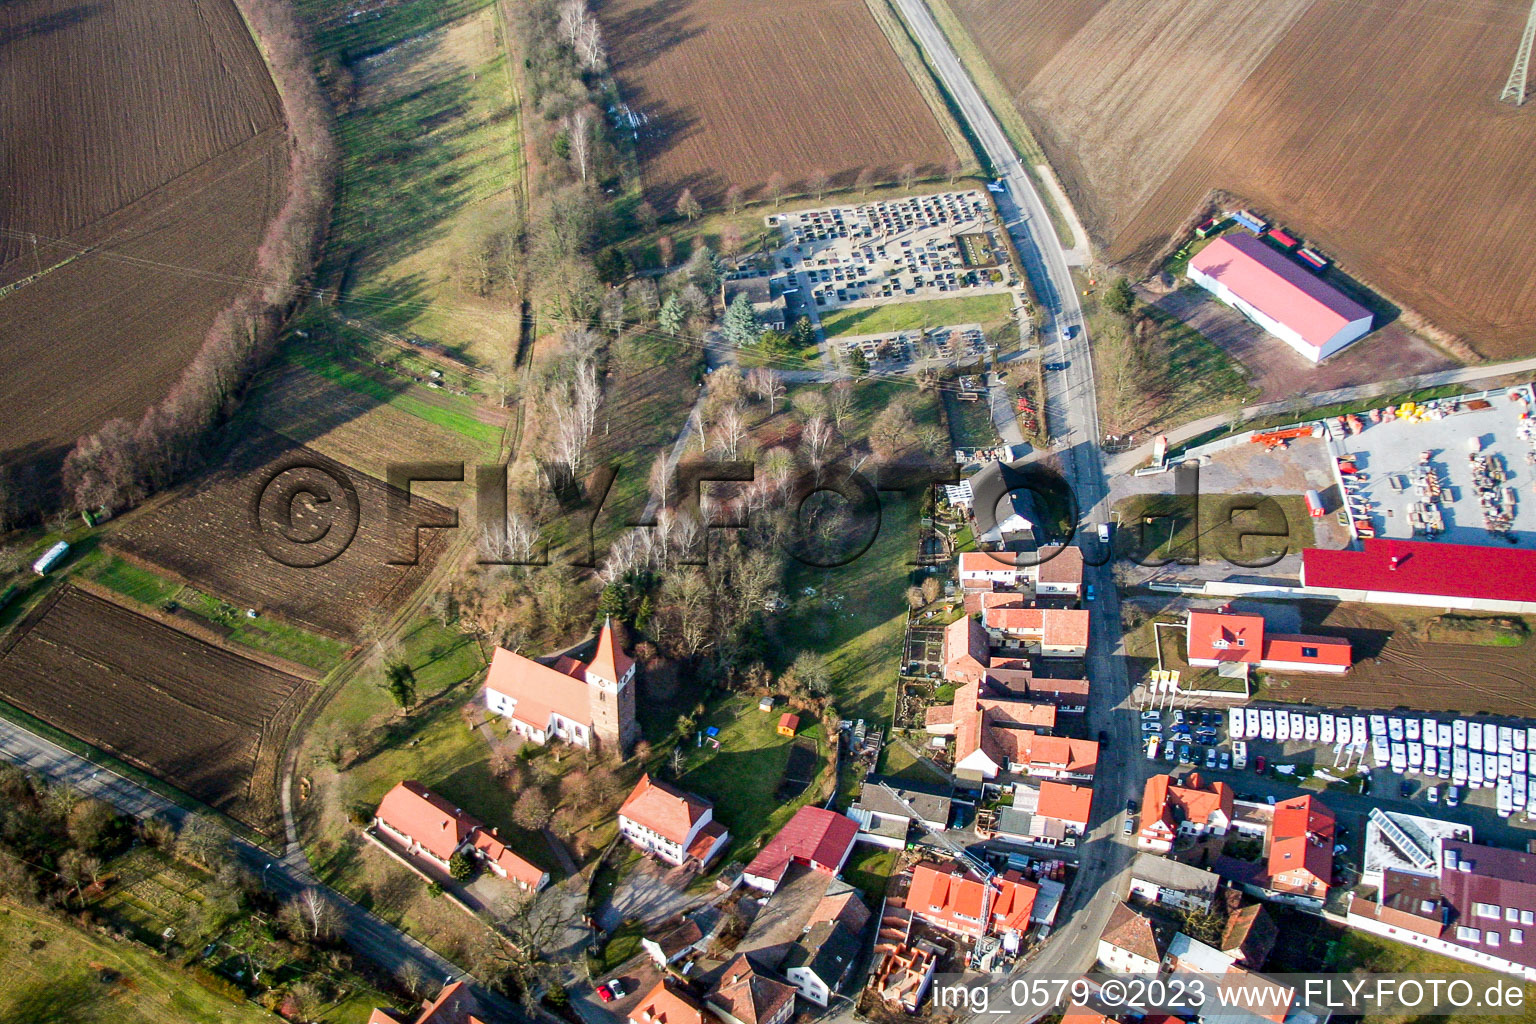 Aerial view of Church of Minfeld in Minfeld in the state Rhineland-Palatinate, Germany